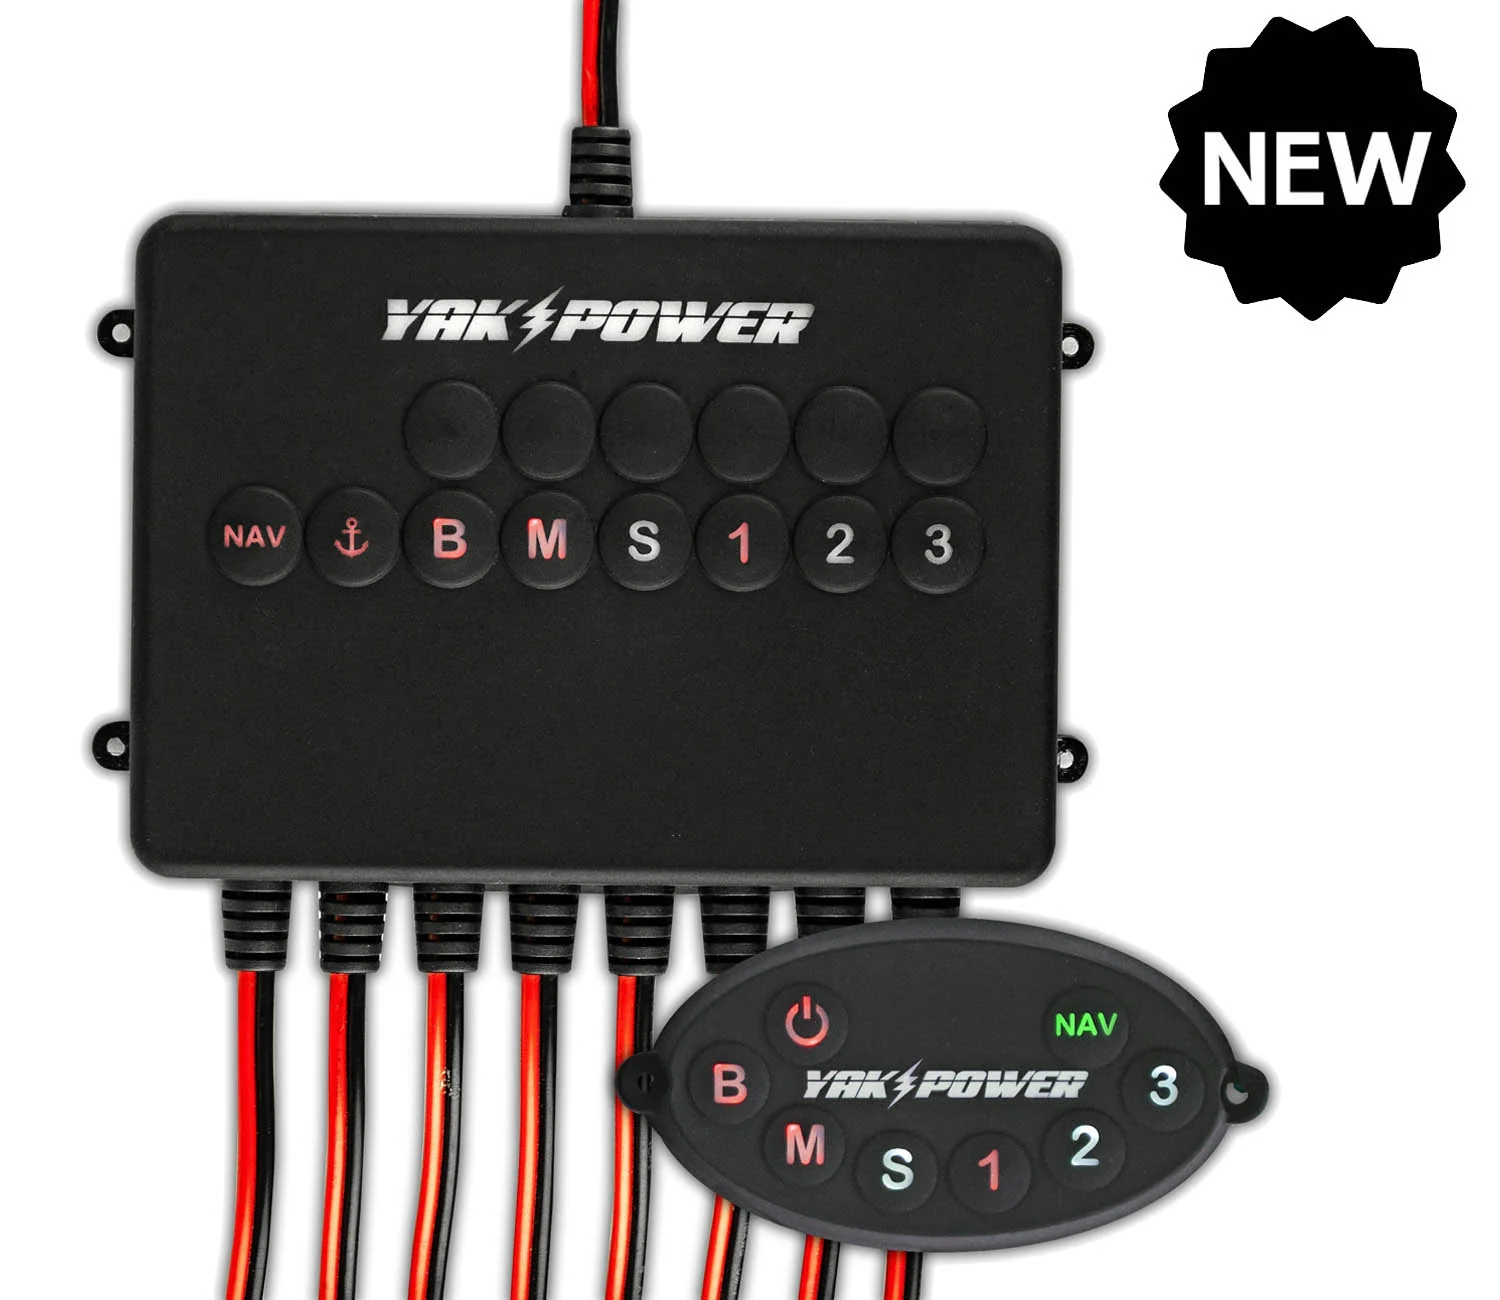 Yak-Power YP-RP8R 8 mini panel wont work after first ride, 3 days old?